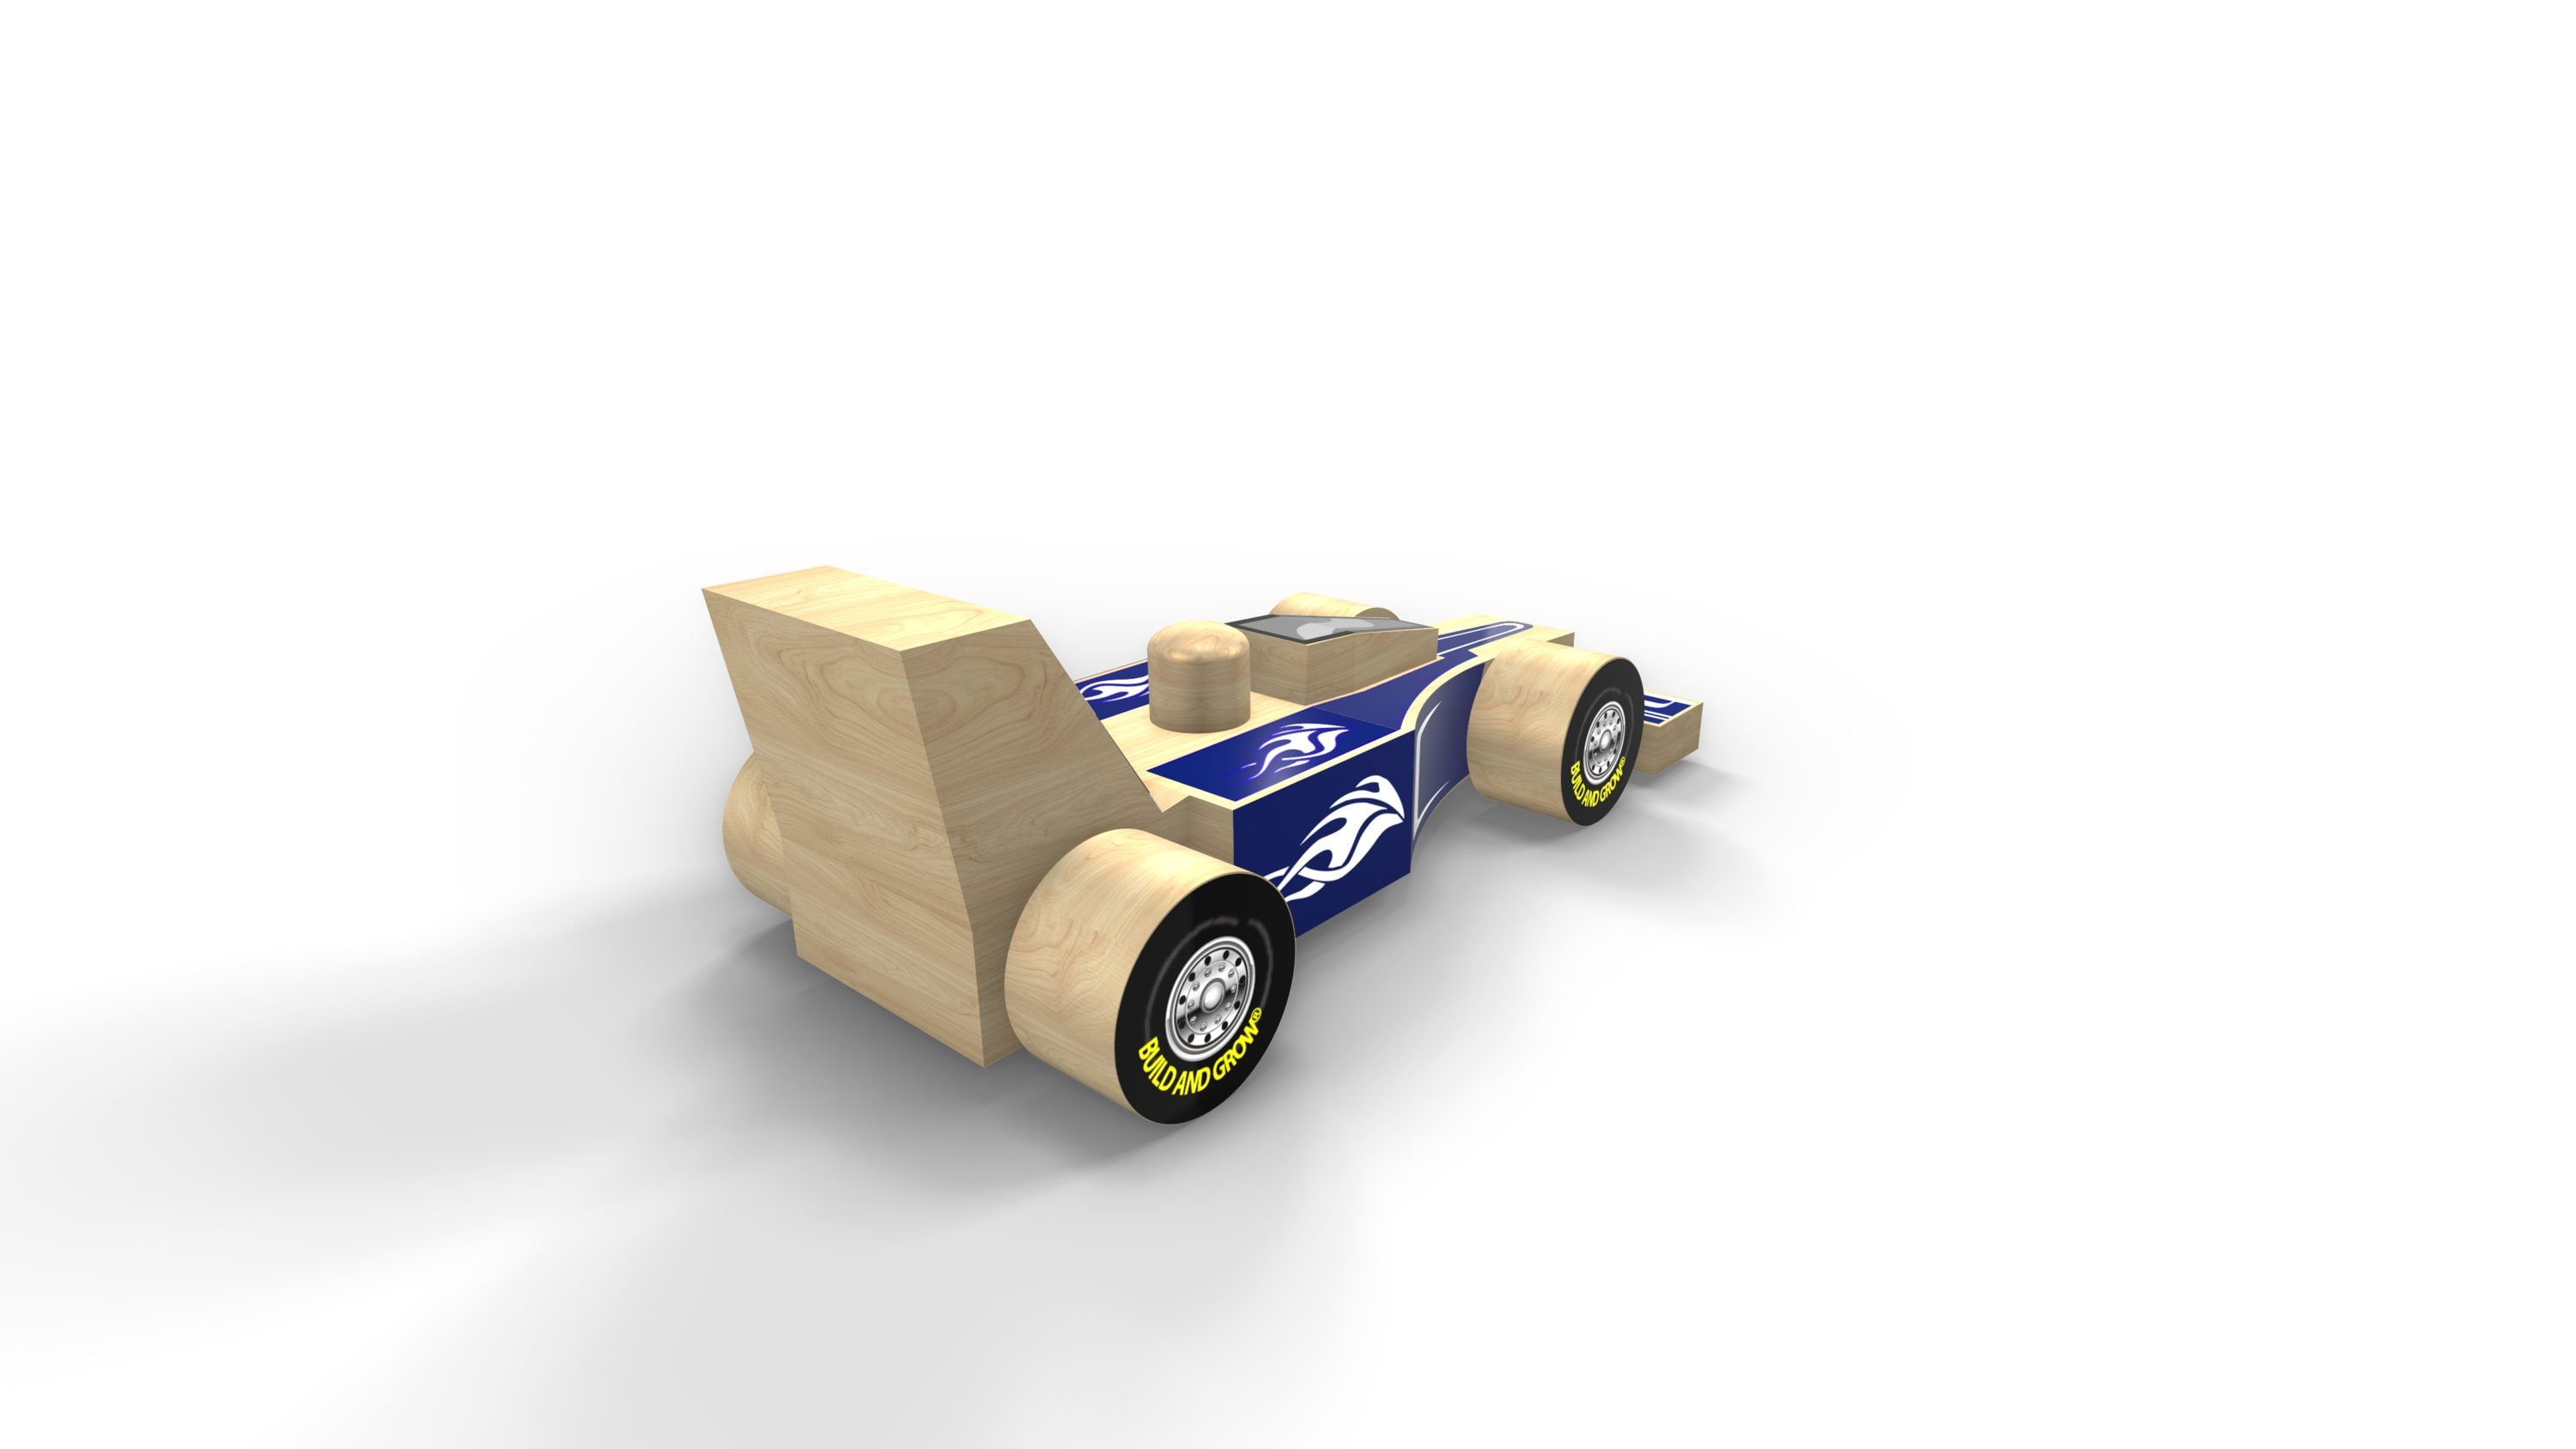 Revell Kid's Beginner Pinewood Derby Project Kit at